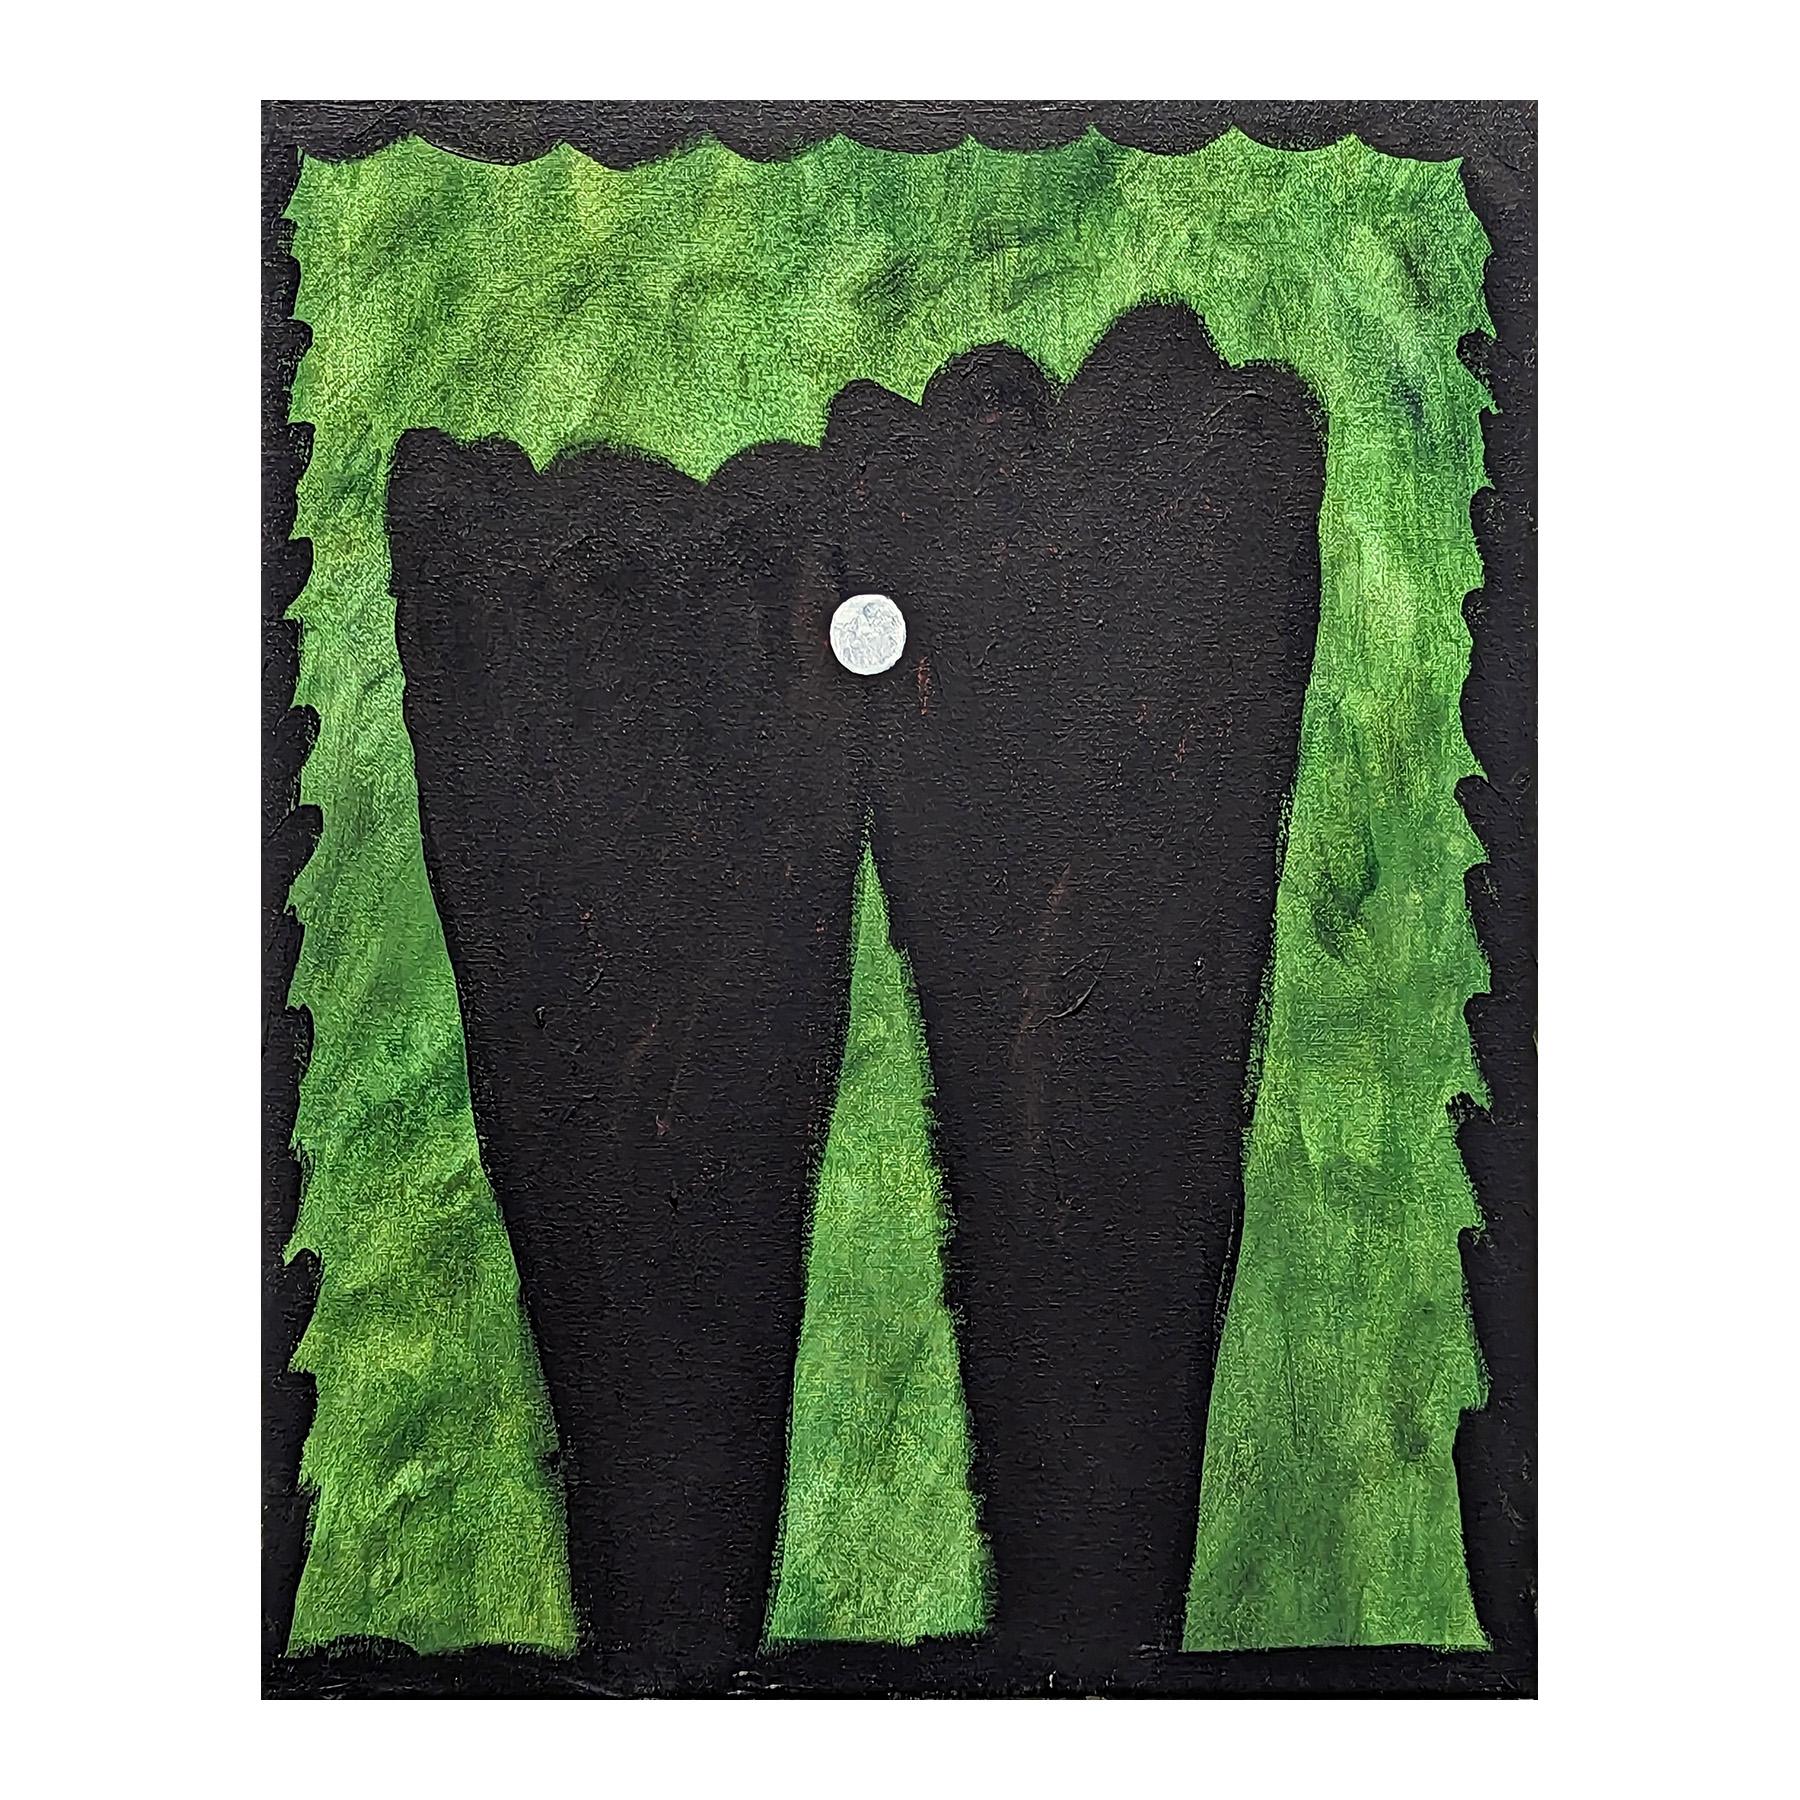 Contemporary abstract painting by local Houston artist Emmanuel Araujo. The work features a mysterious night scene of green and black foliage. Signed, titled, and dated on the reverse. Currently unframed, but options are available. 

Artist